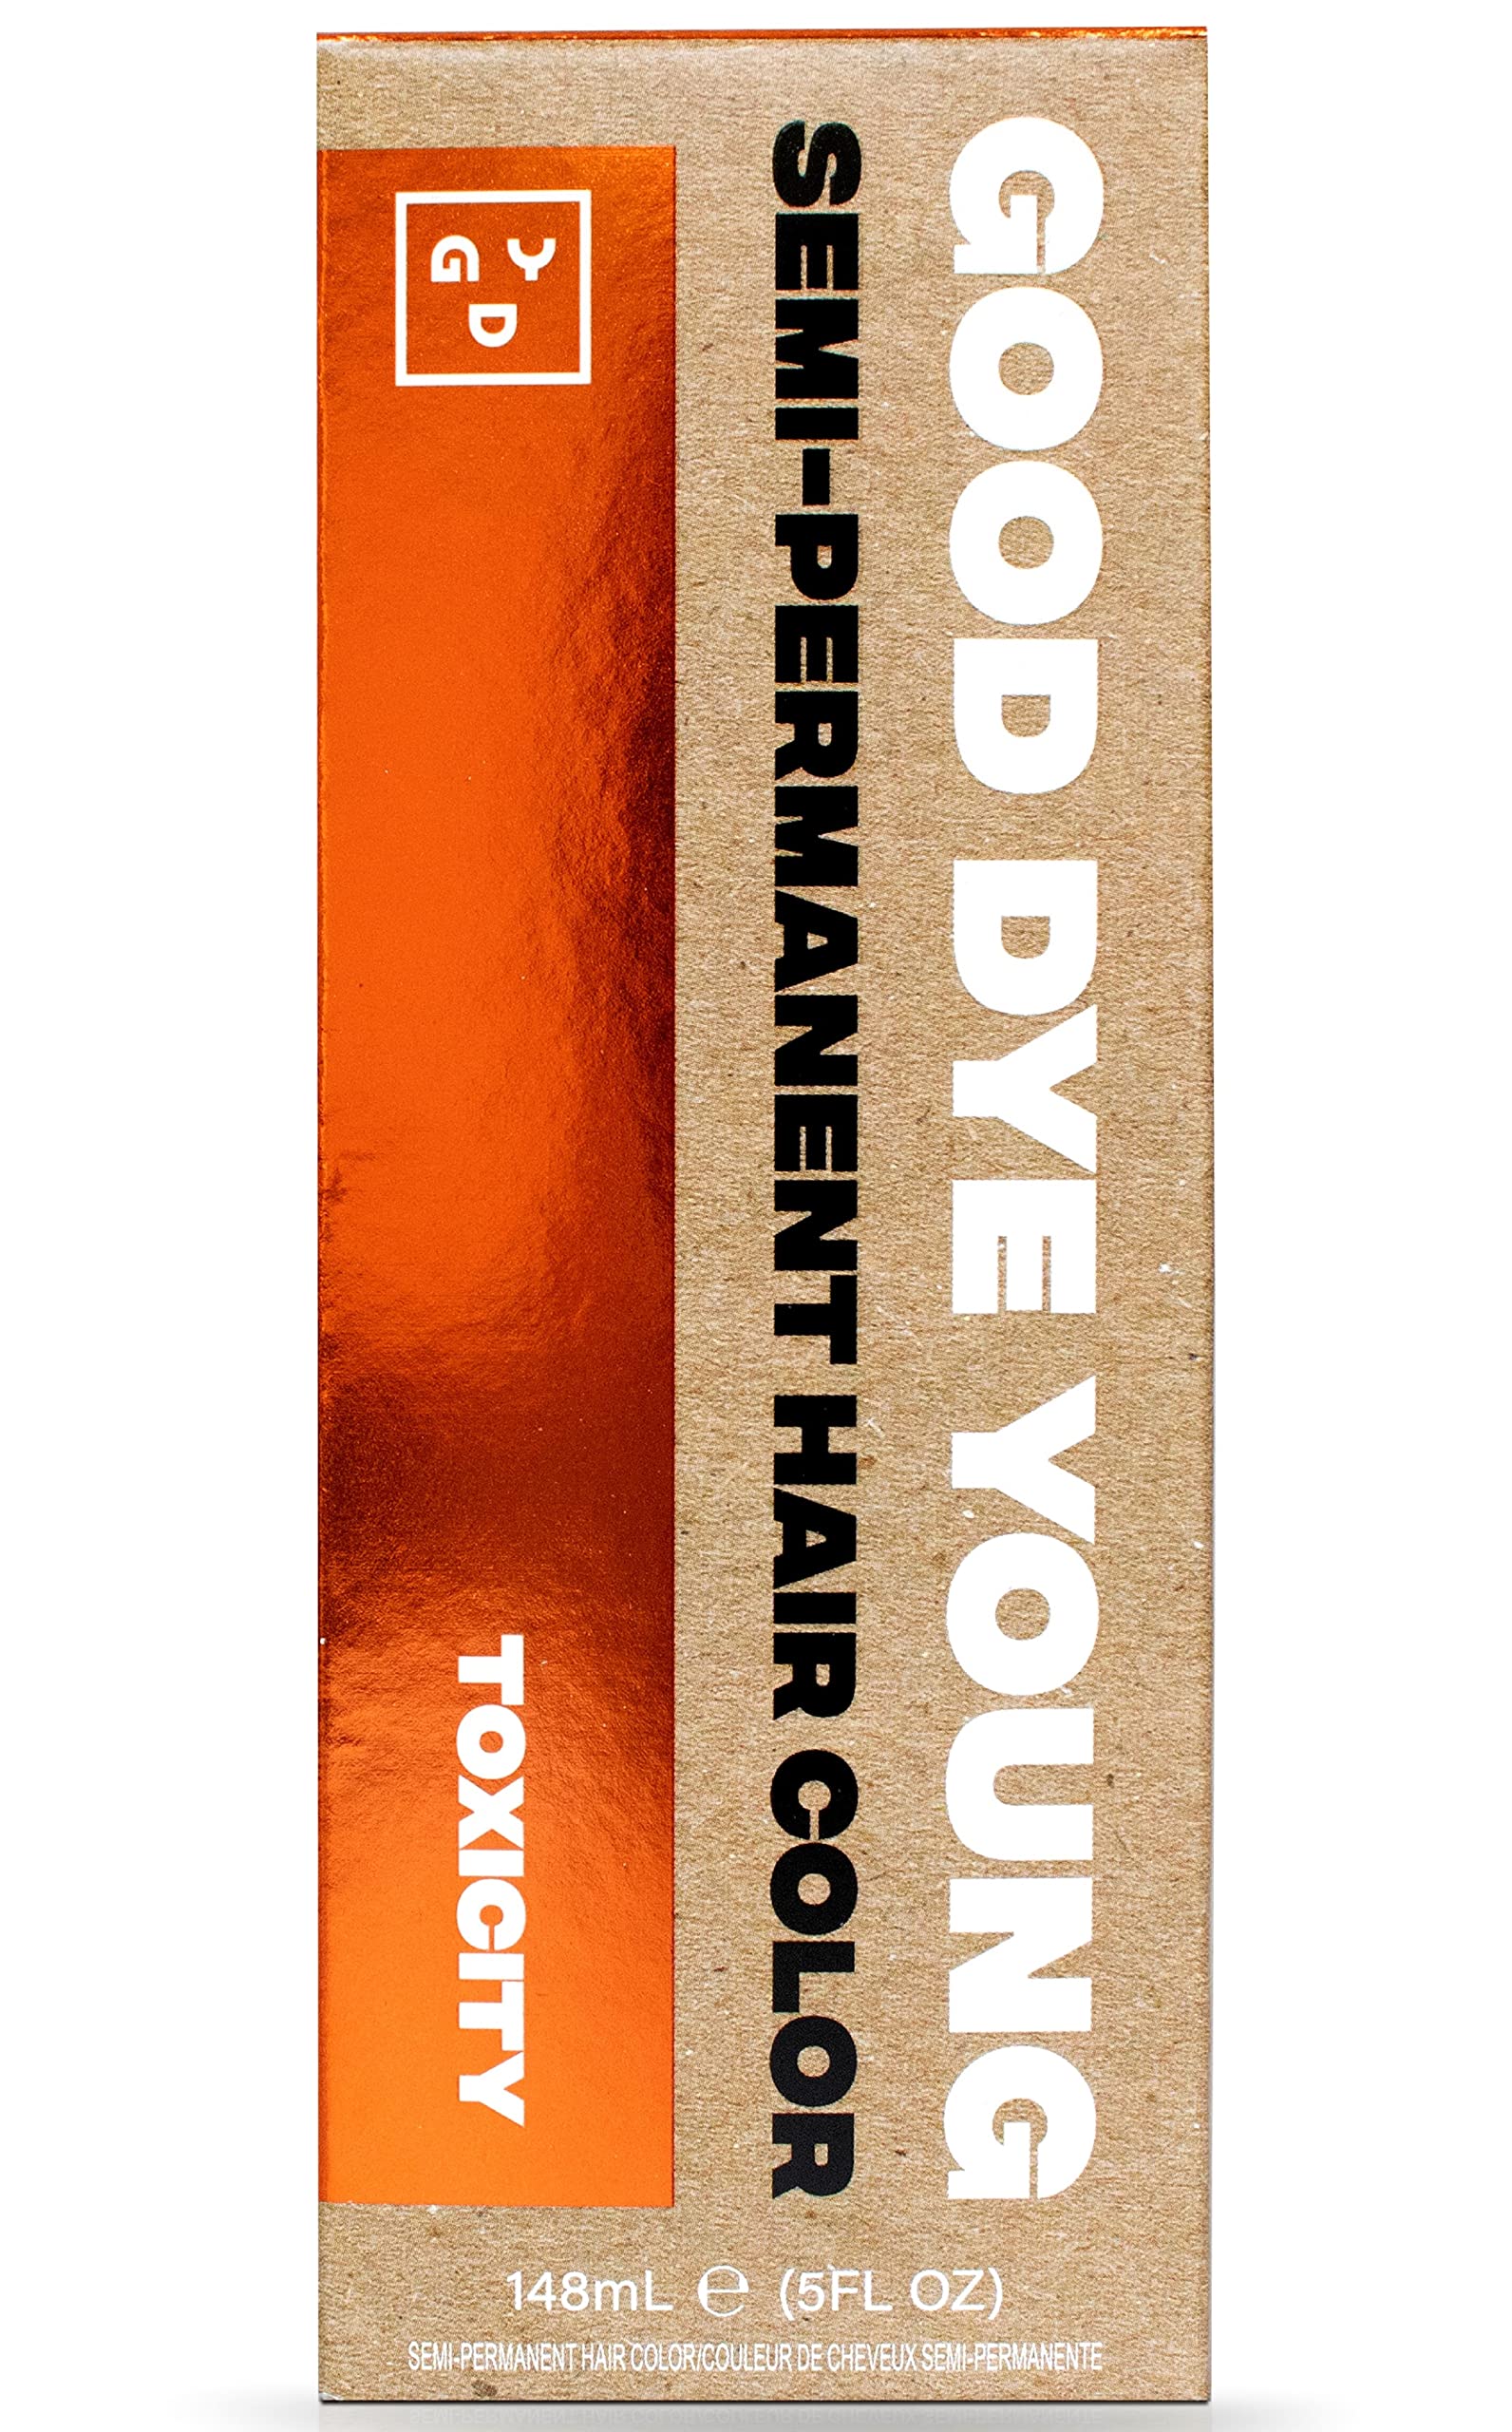 Good Dye Young Semi Permanent Hair Dye (Toxicity - Copper) UV Protective  Temporary Hair Color Lasts 15-24+ Washes Conditioning Copper Hair Dye PPD  free Hair Dye - Cruelty-Free & Vegan Hair Dye